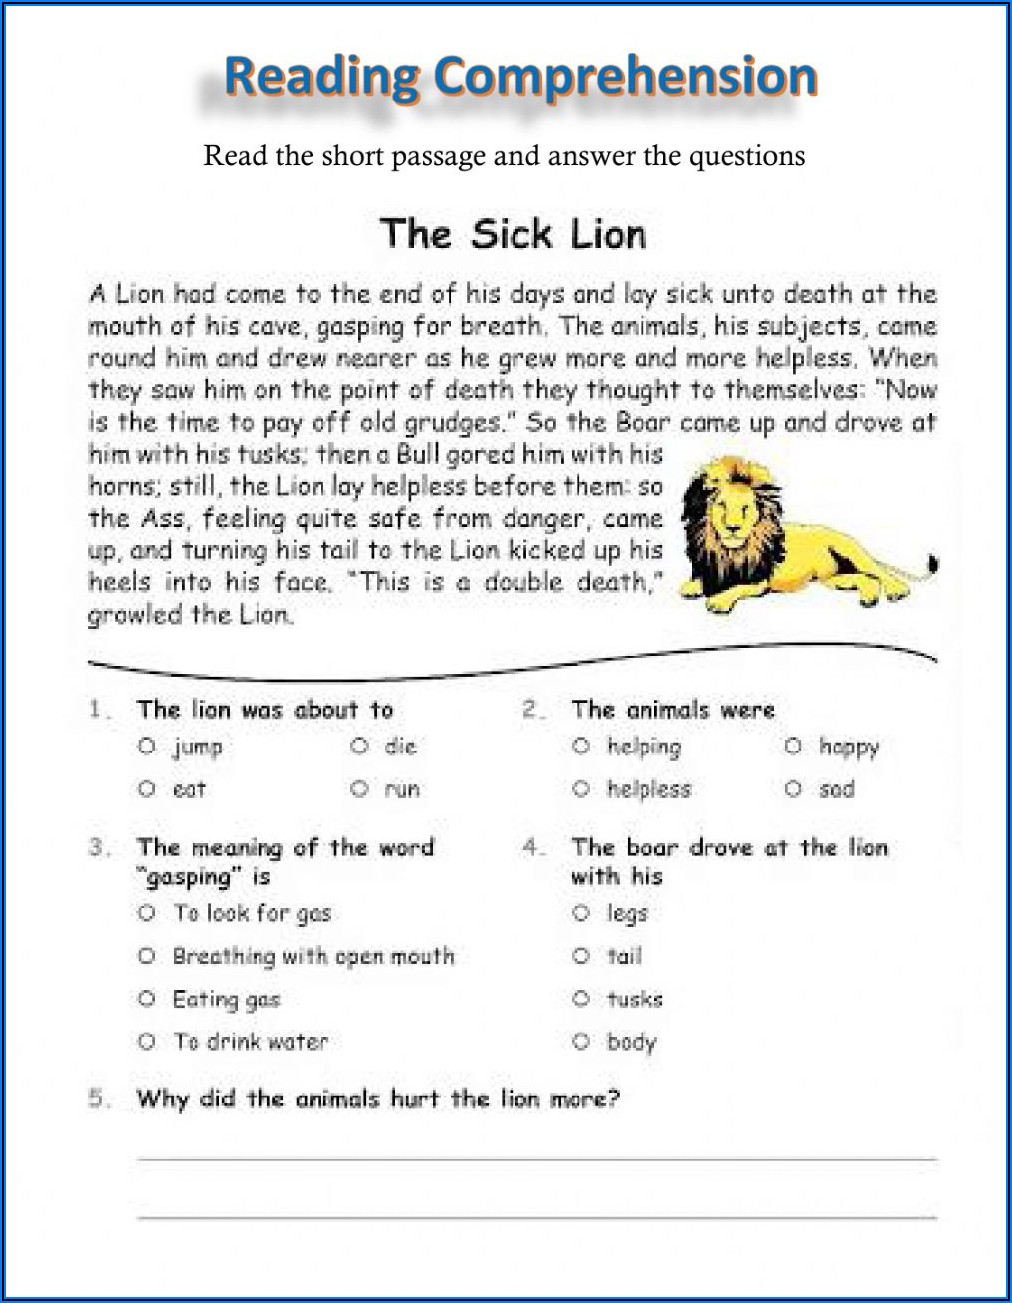 Reading Comprehension Worksheets For Grade 5 With Answers Pdf